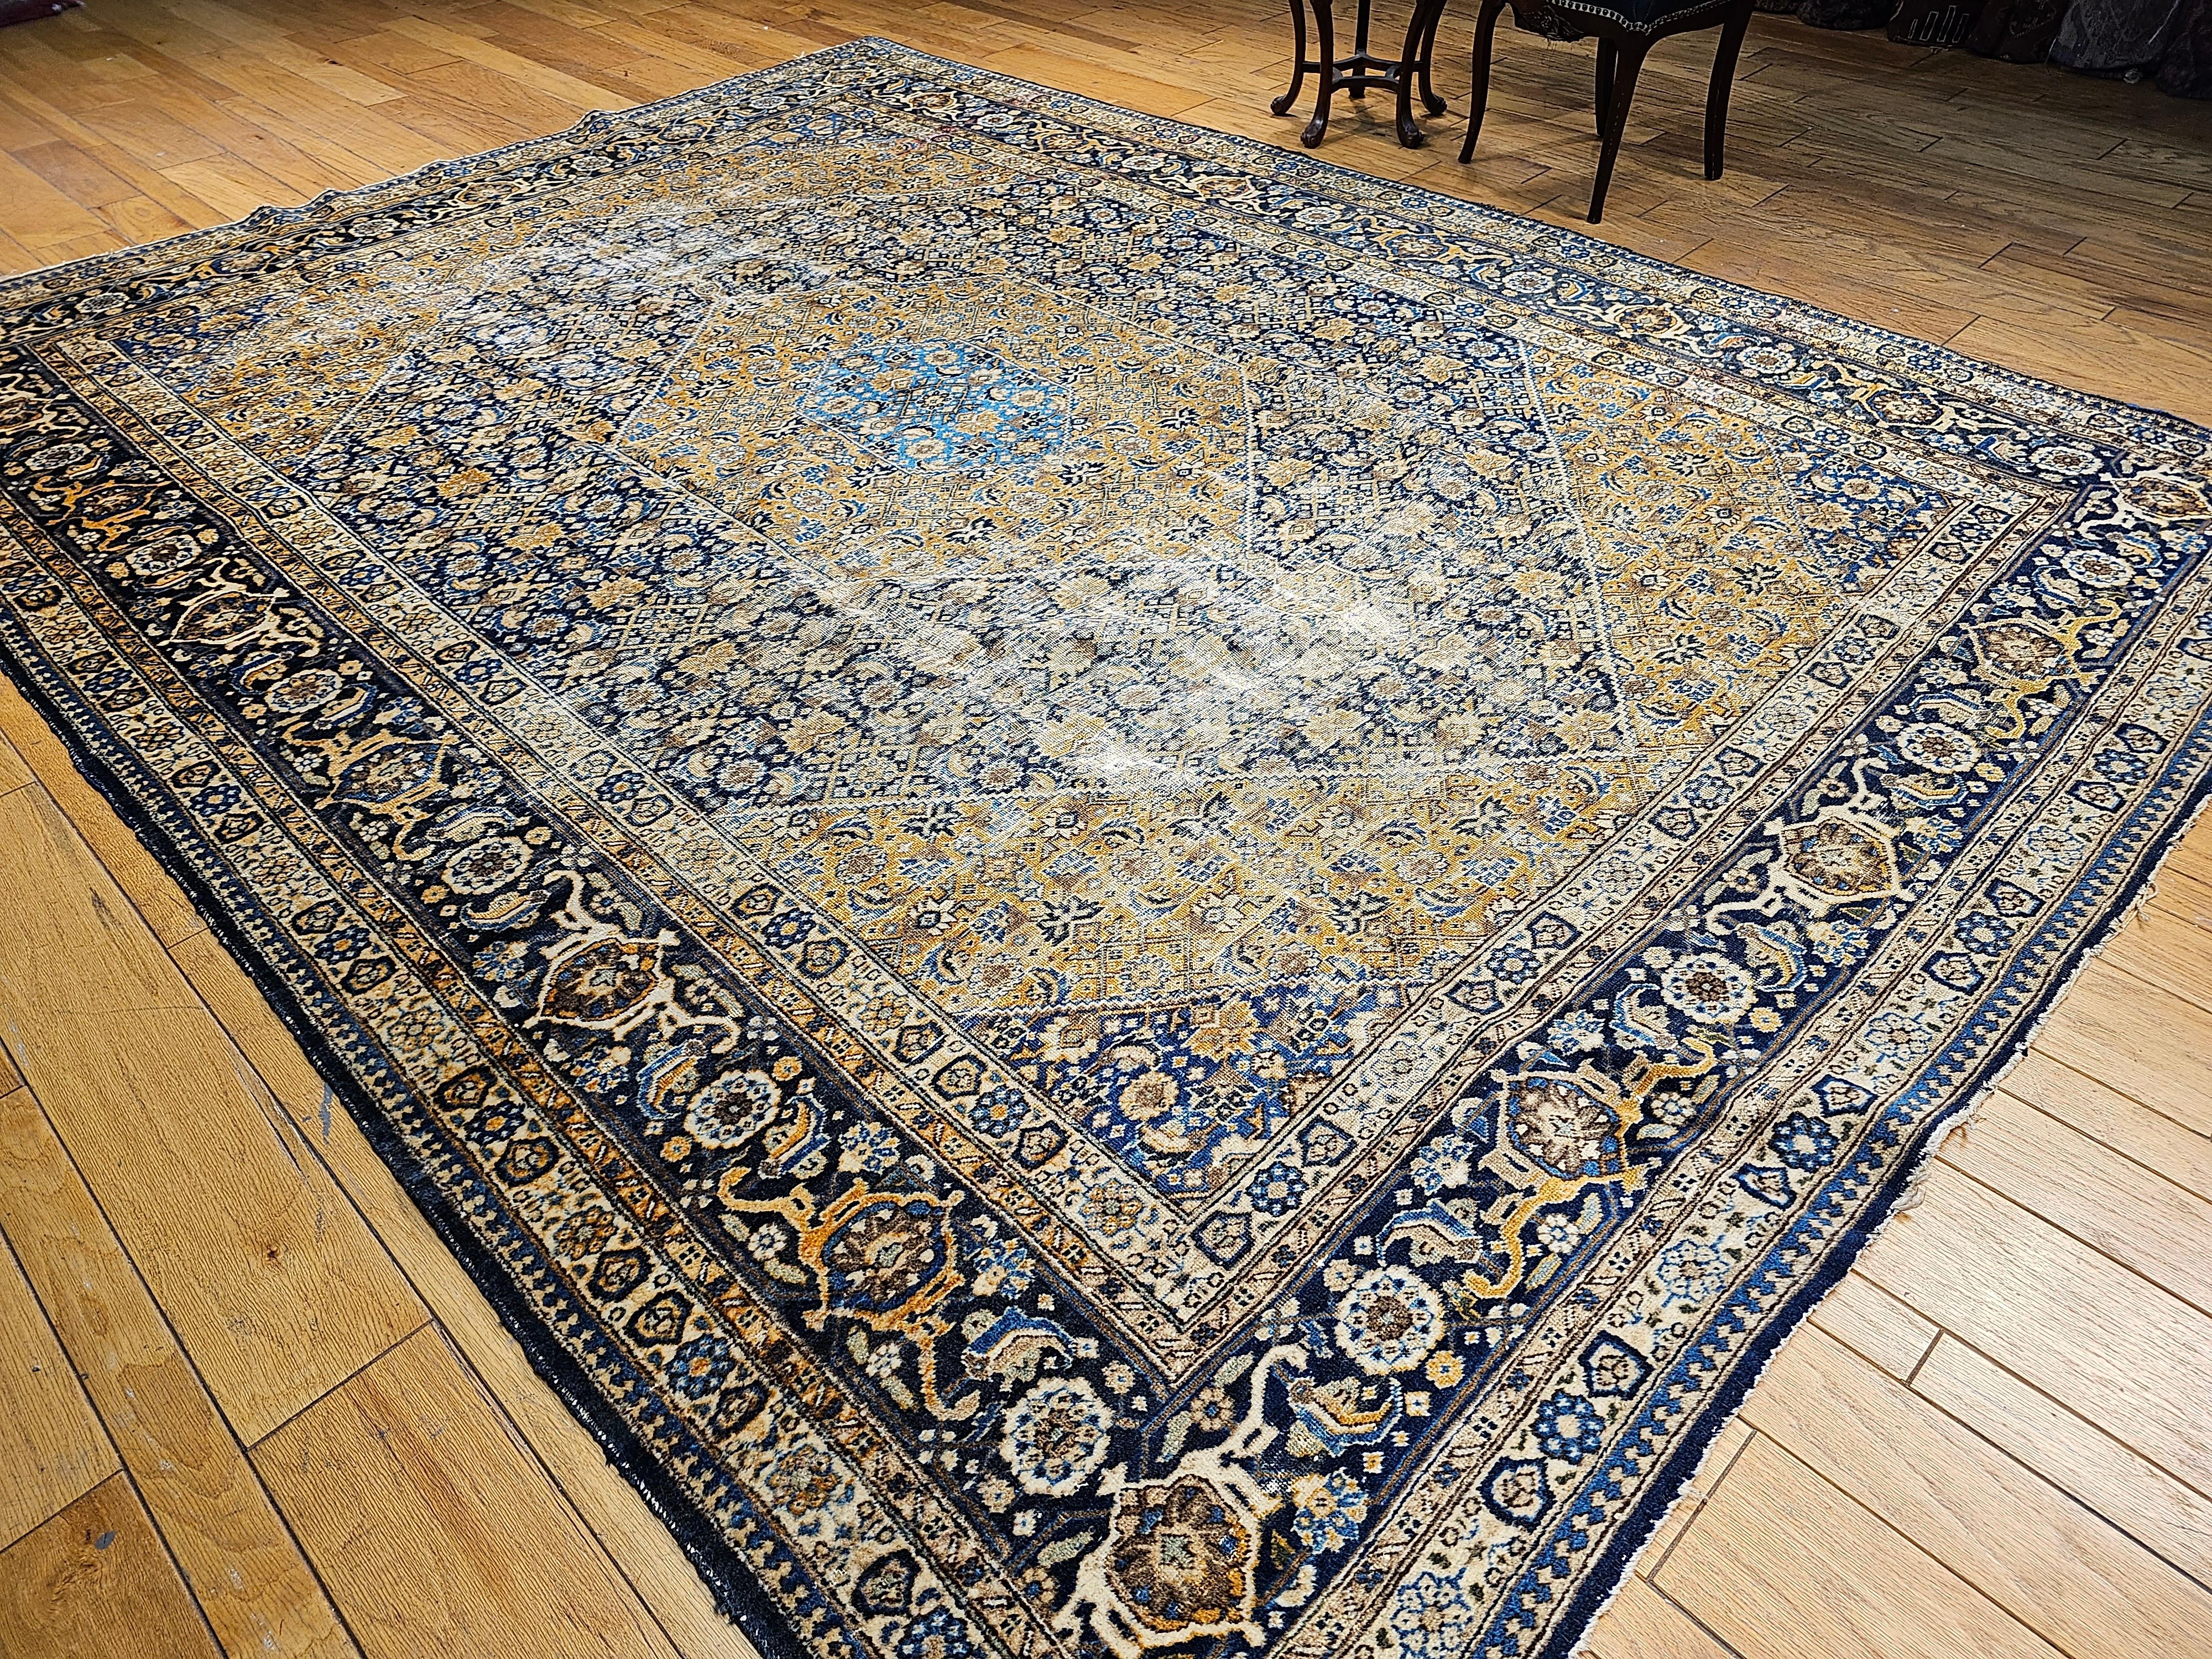 Vintage Persian Tabriz in Geometric Mahi Pattern in French Blue, Navy, Camel For Sale 3